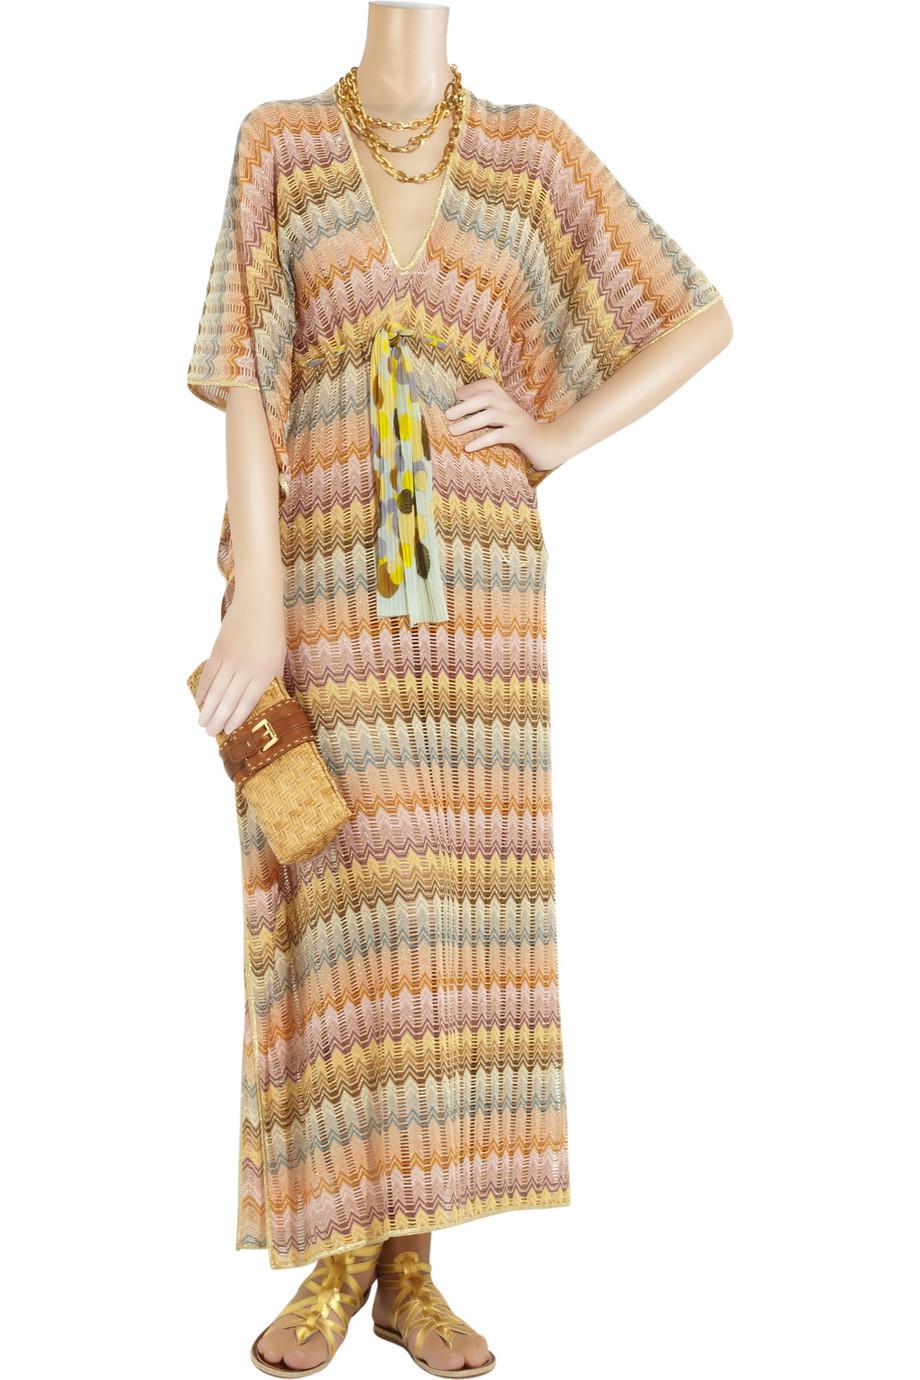 Beautiful Missoni Orange Label Knit Kaftan Tunic Dress Coverup 

A Classic Missoni Signature Piece That Will Last You For Years 

Details:

Classic MISSONI signature zigzag knit
With gorgeous golden lurex thread
Simply slips on
Fit can be regulated